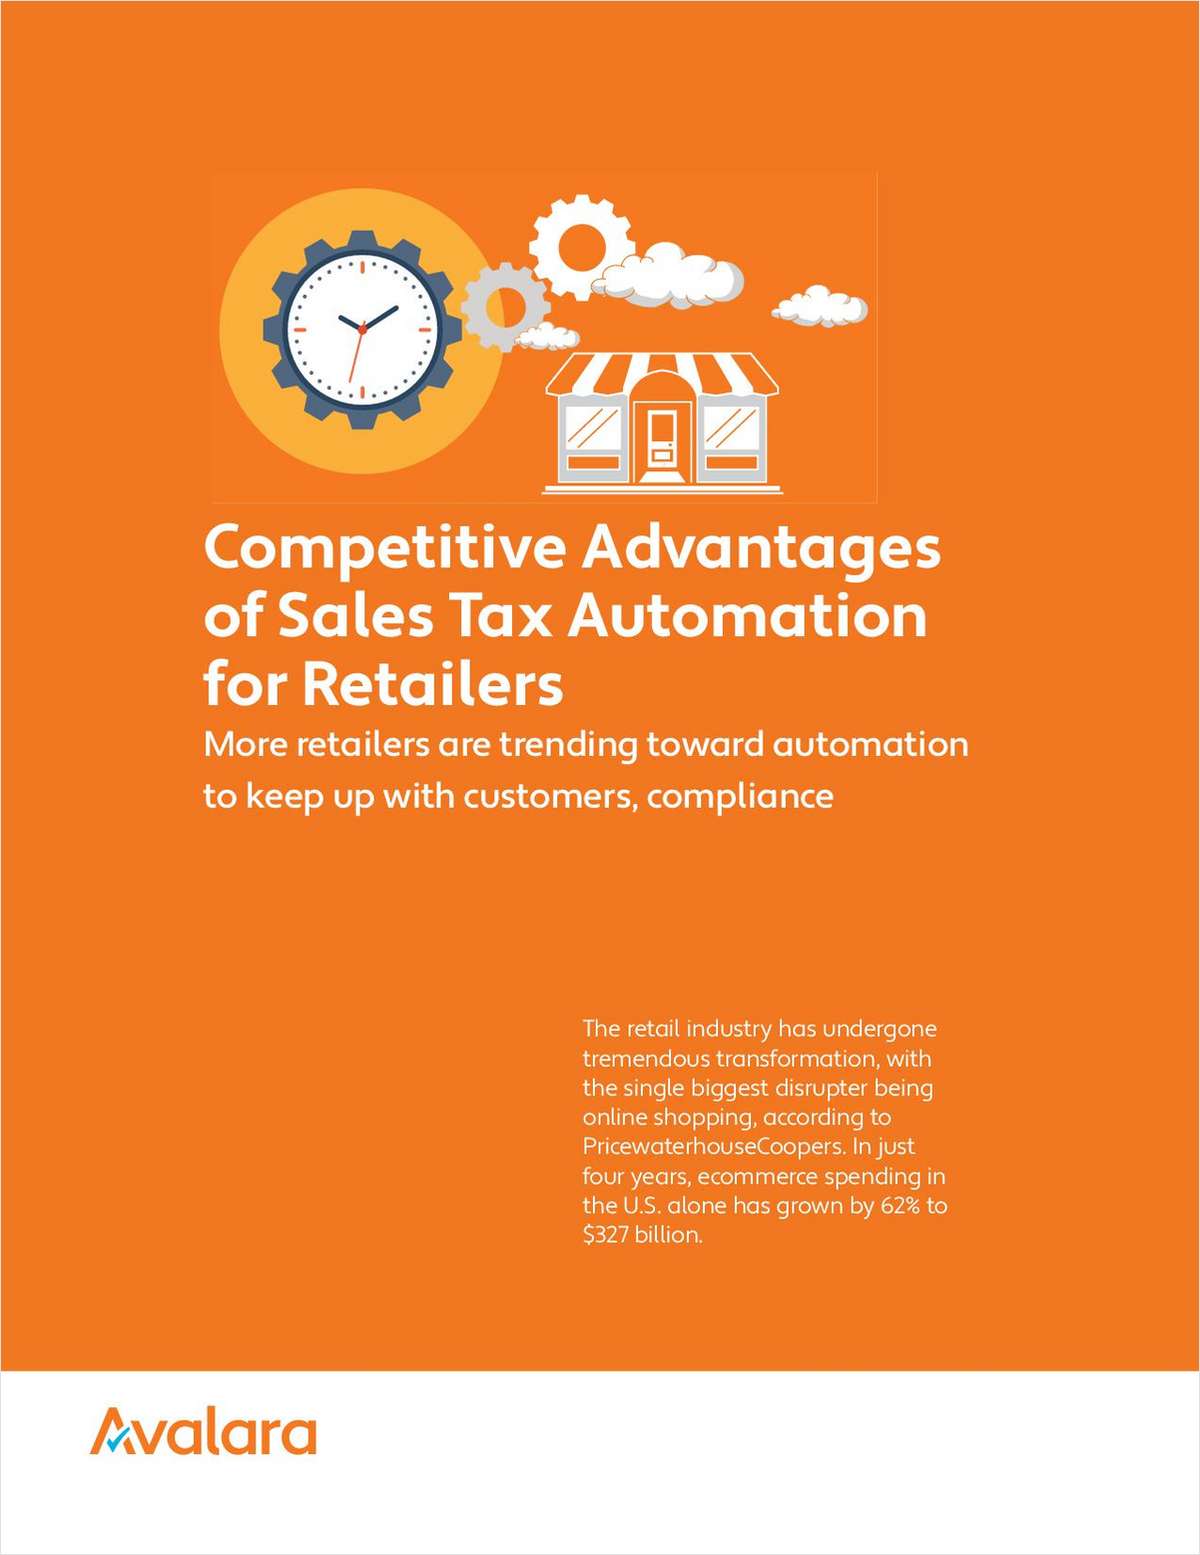 Competitive Advantages of Sales Tax Automation for Retailers